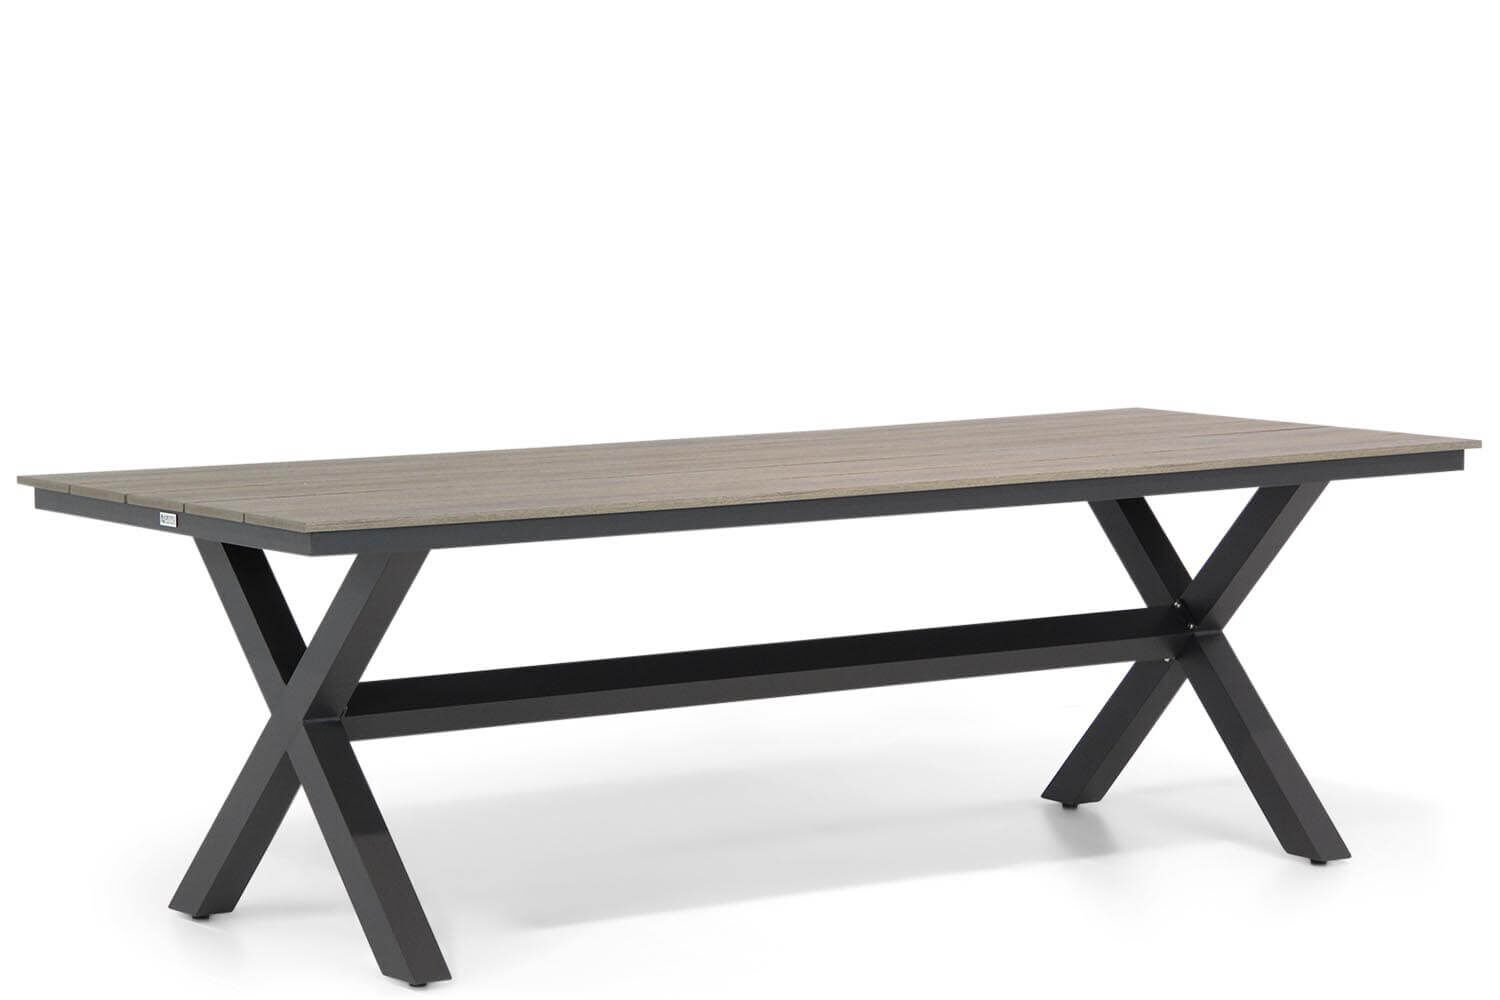 Federaal rots beest Lifestyle Forest dining tuintafel 240 x 92 cm - Tuinmeubelshop.nl